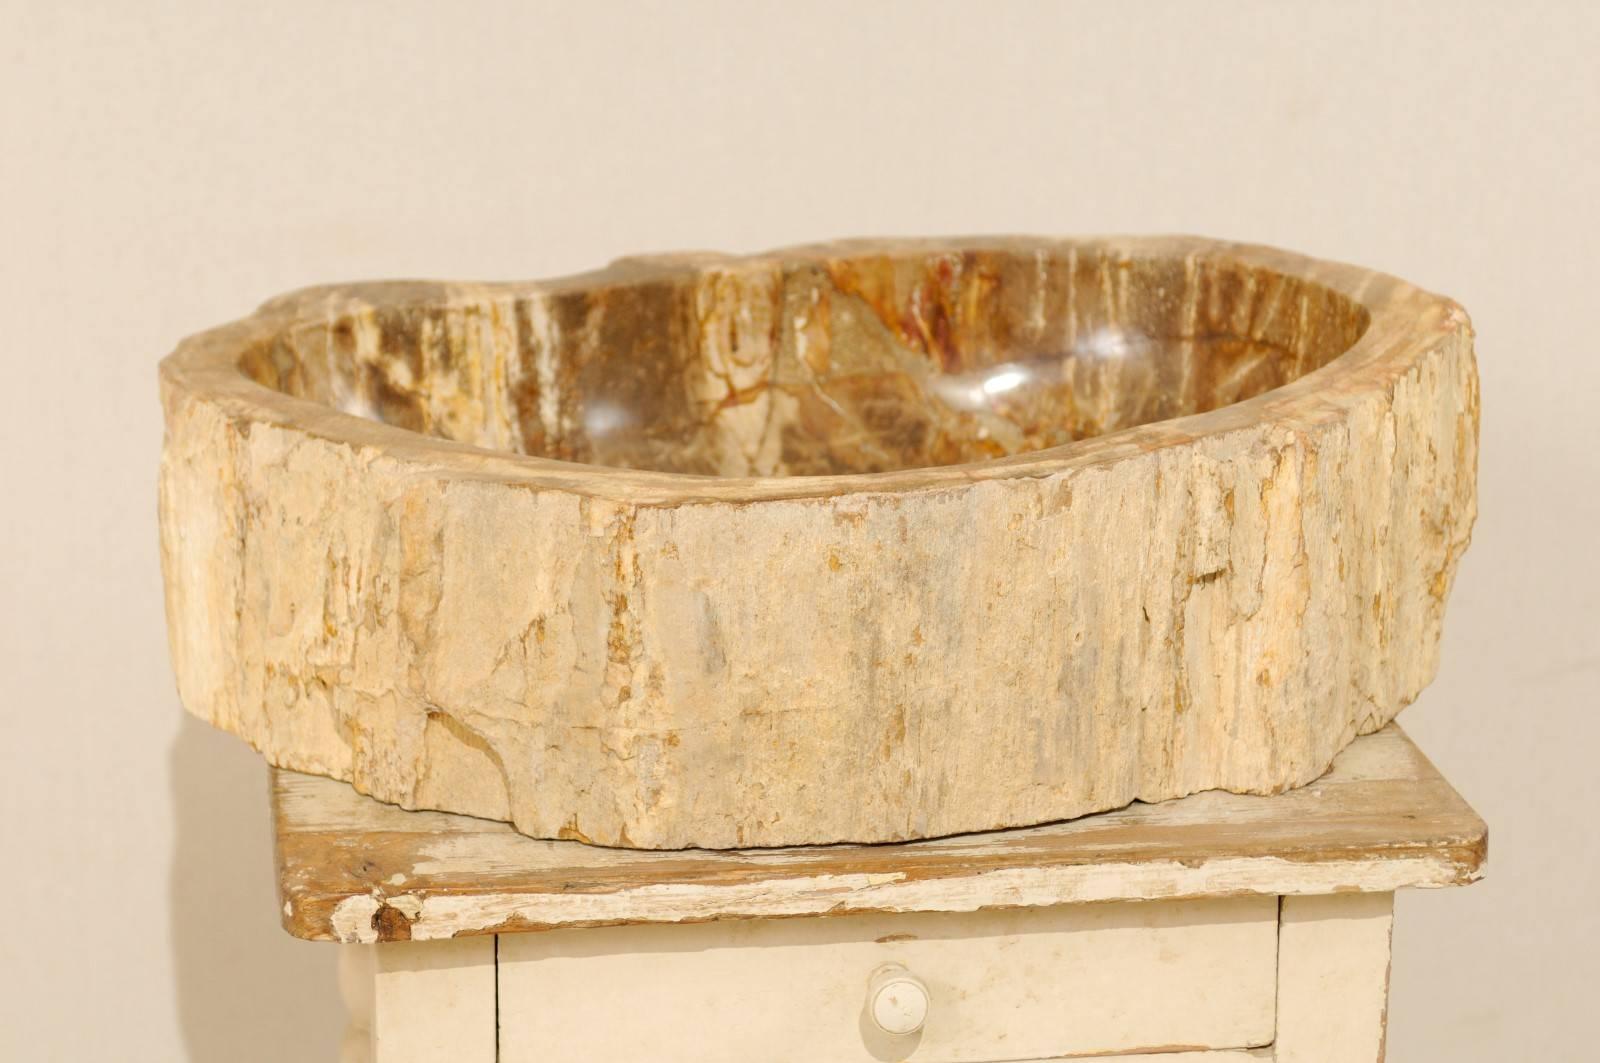 Carved Polished Petrified Wood Sink of Neutral Cream, Tan, Light Brown and Beige Hues